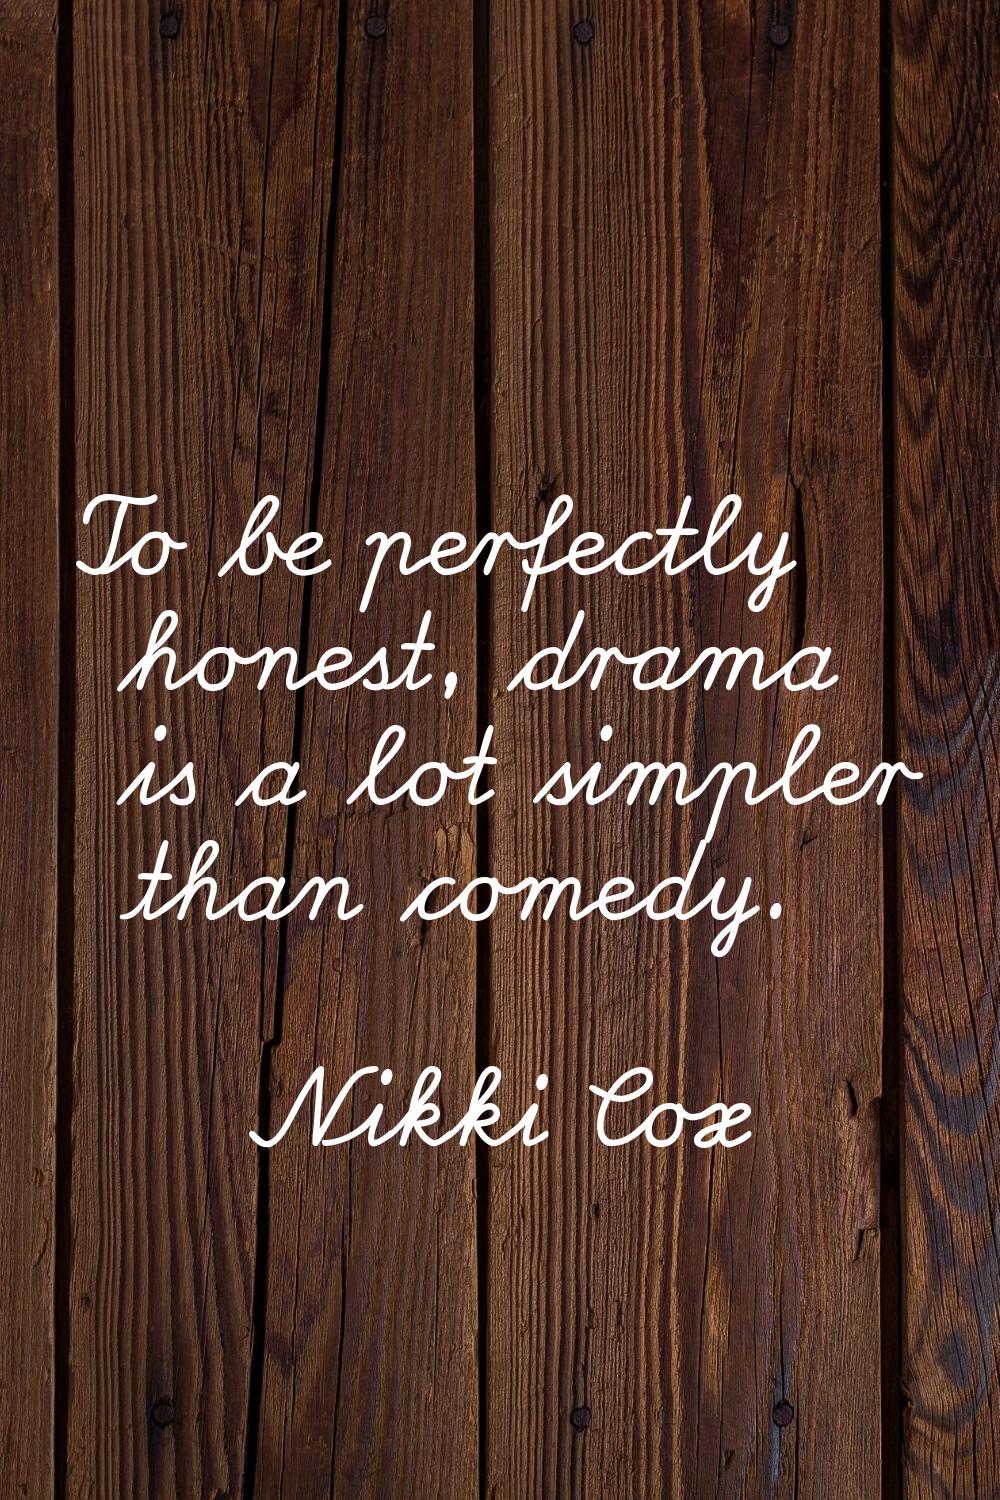 To be perfectly honest, drama is a lot simpler than comedy.